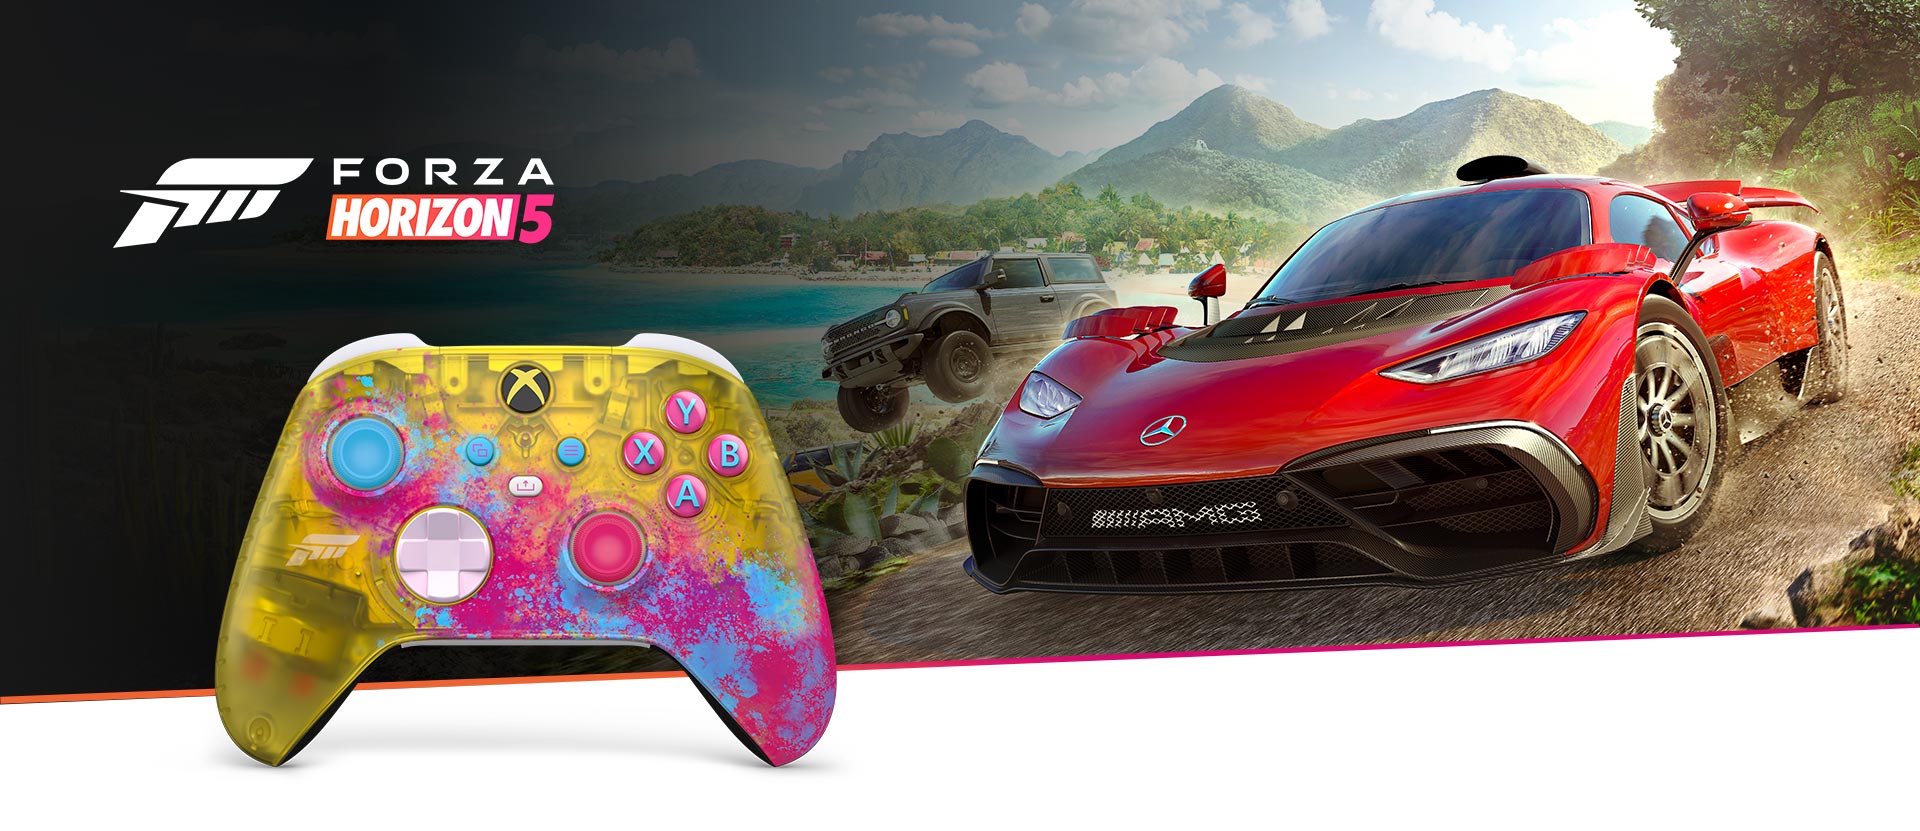 Xbox Wireless Controller Forza Horizon 5 Limited Edition is a 